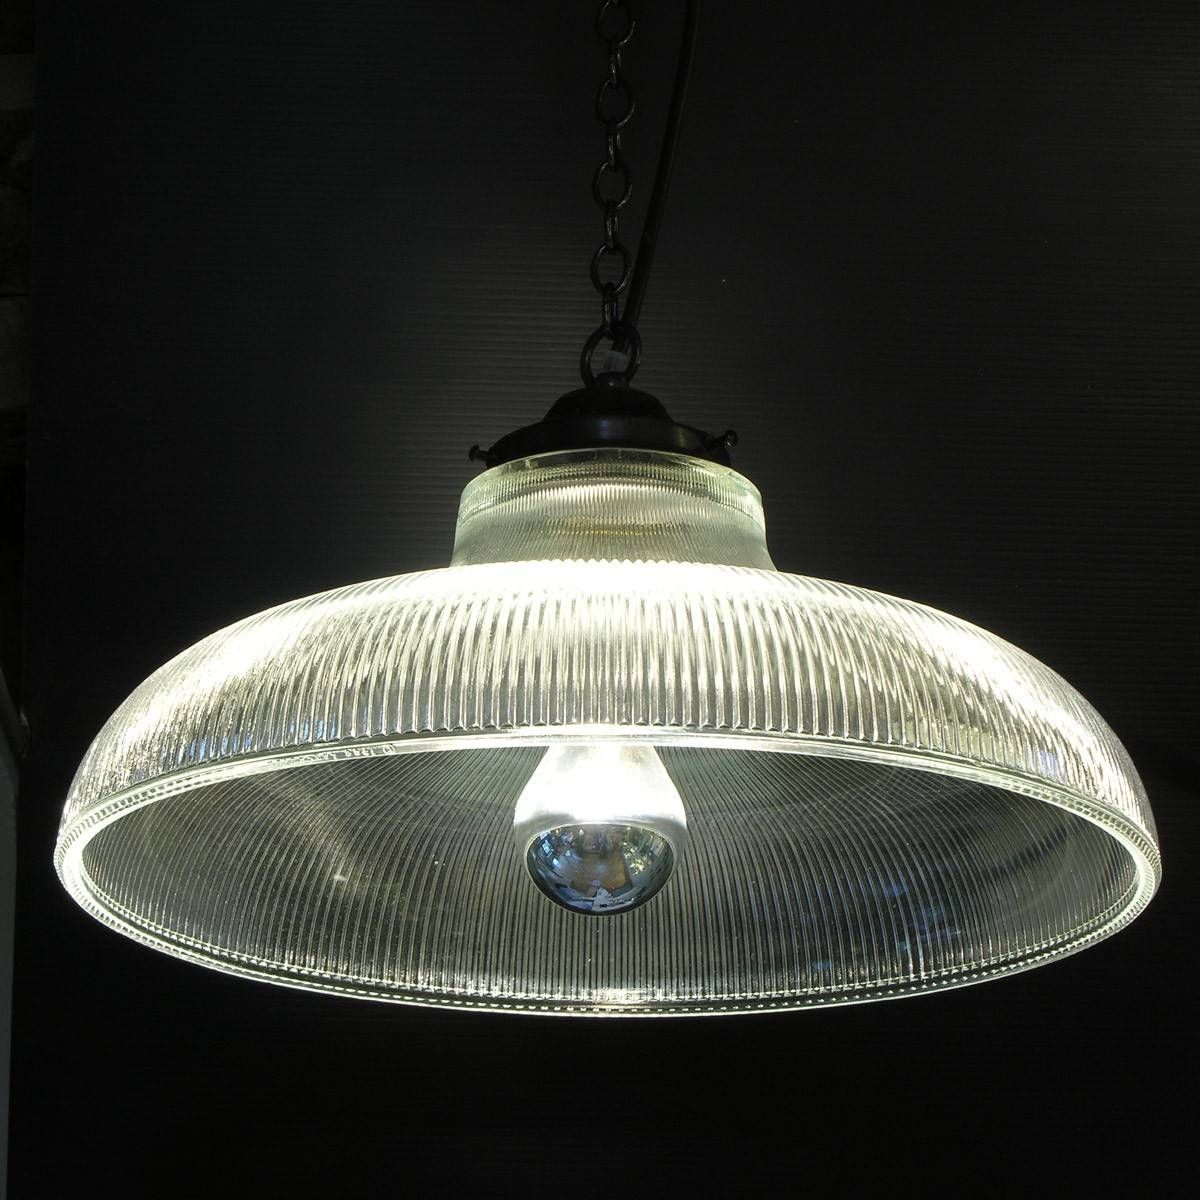 Railroad Pendant Light Intended For Railroad Pendant Lights (View 2 of 15)